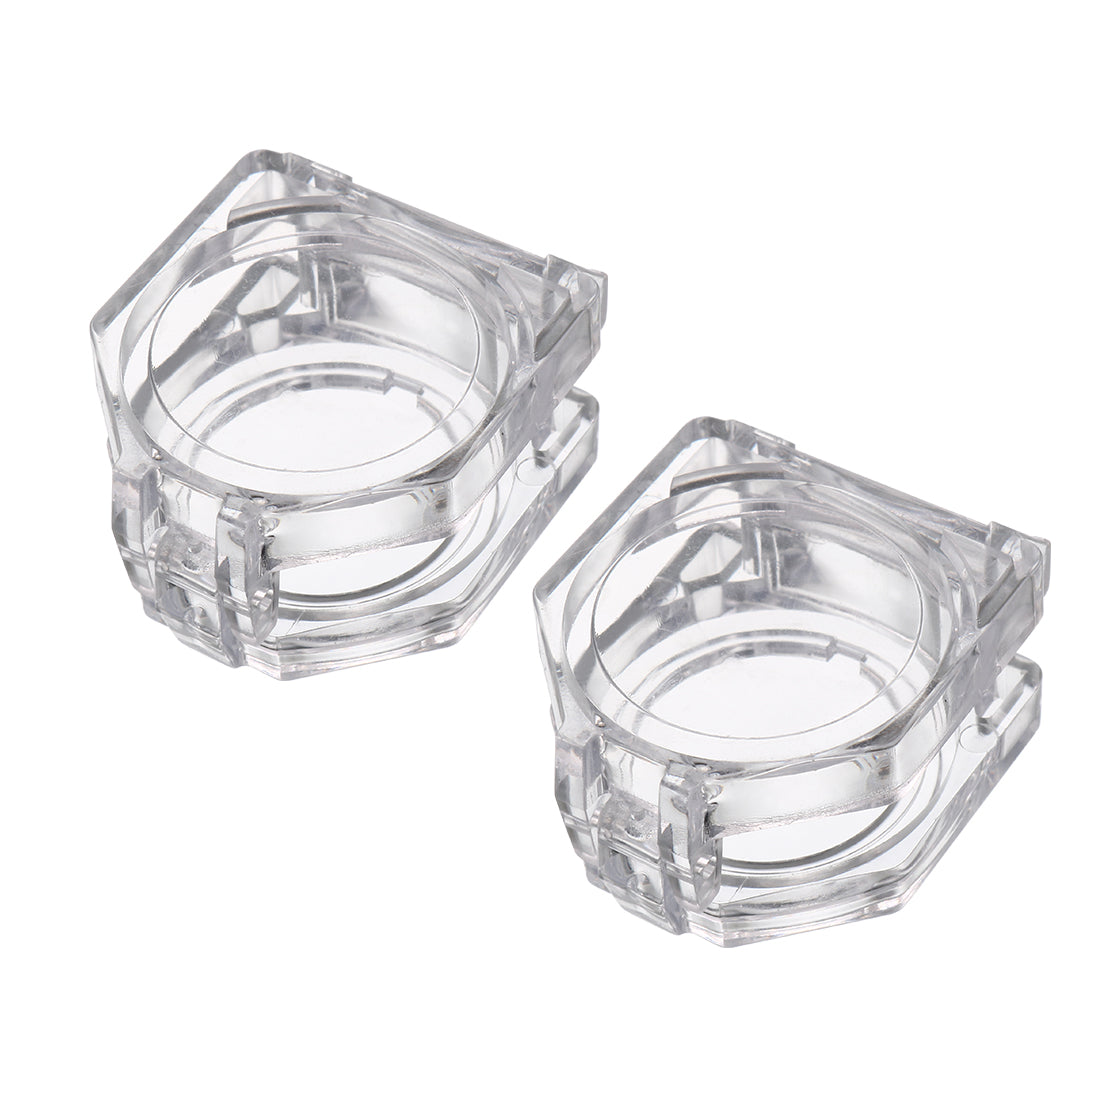 uxcell Uxcell 2pcs Clear Plastic Switch Cover Protector for 22mm Diameter Push Button Switch